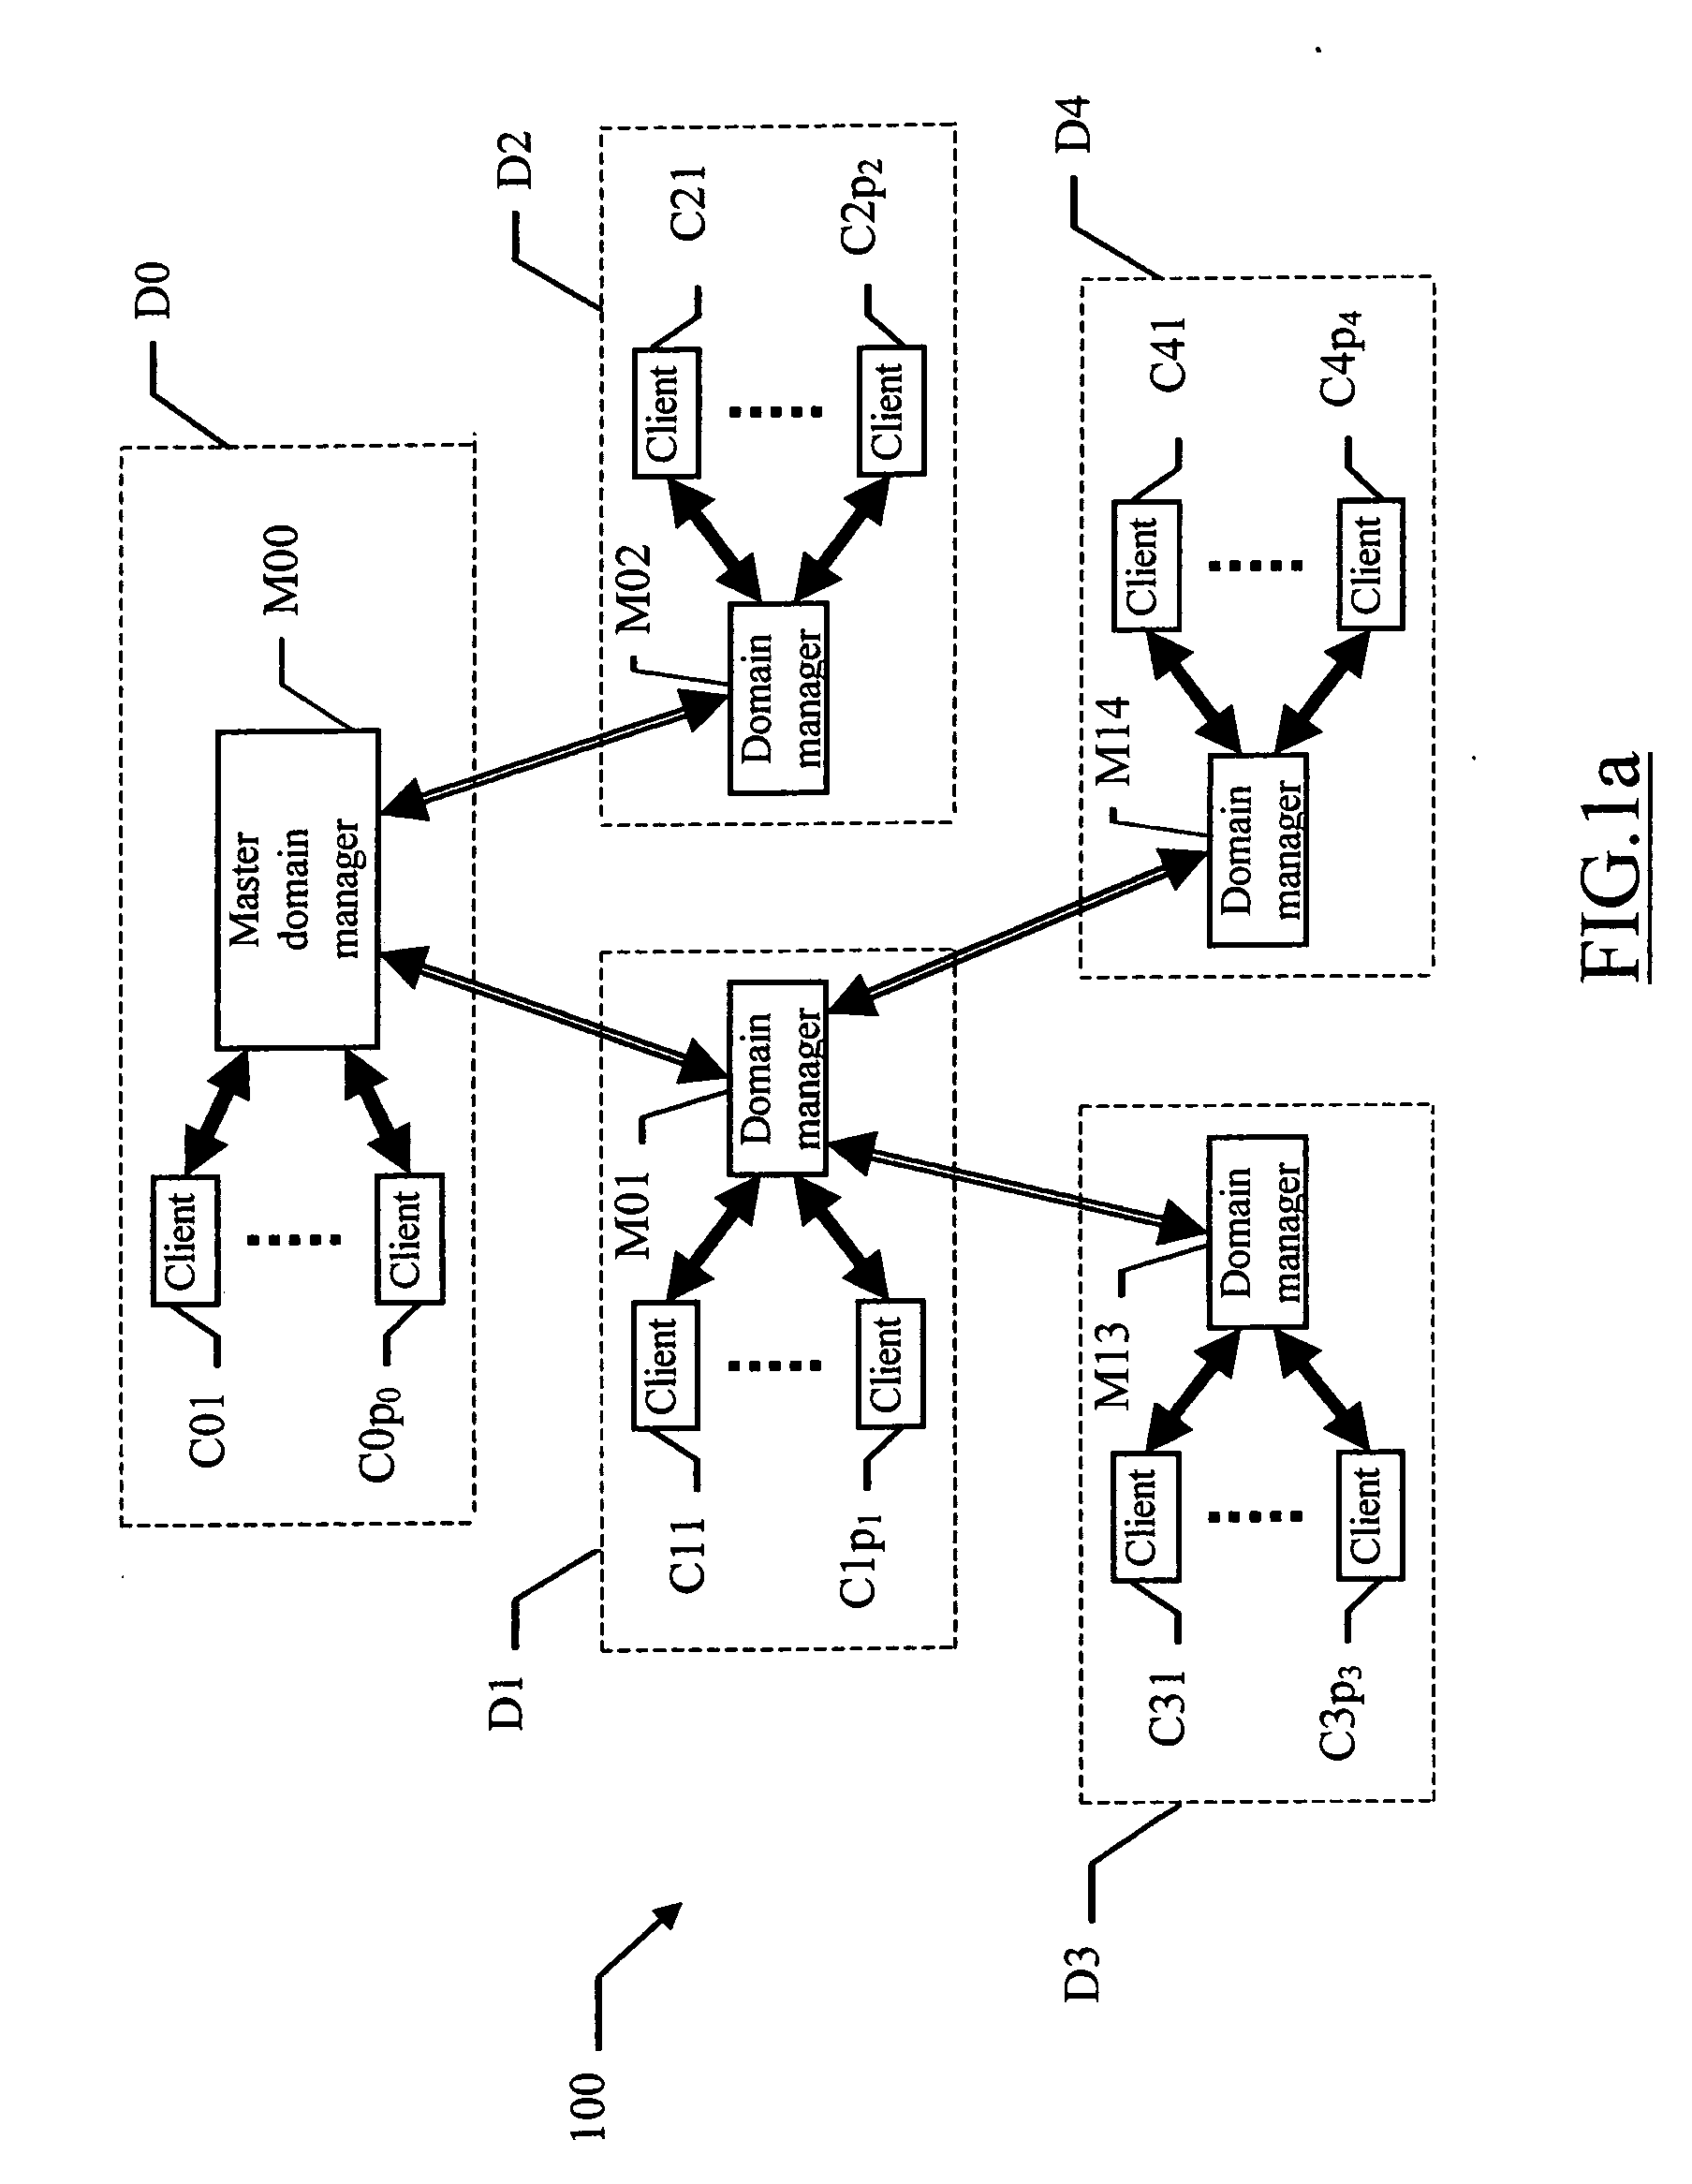 Method for allocating resources in a hierarchical data processing system